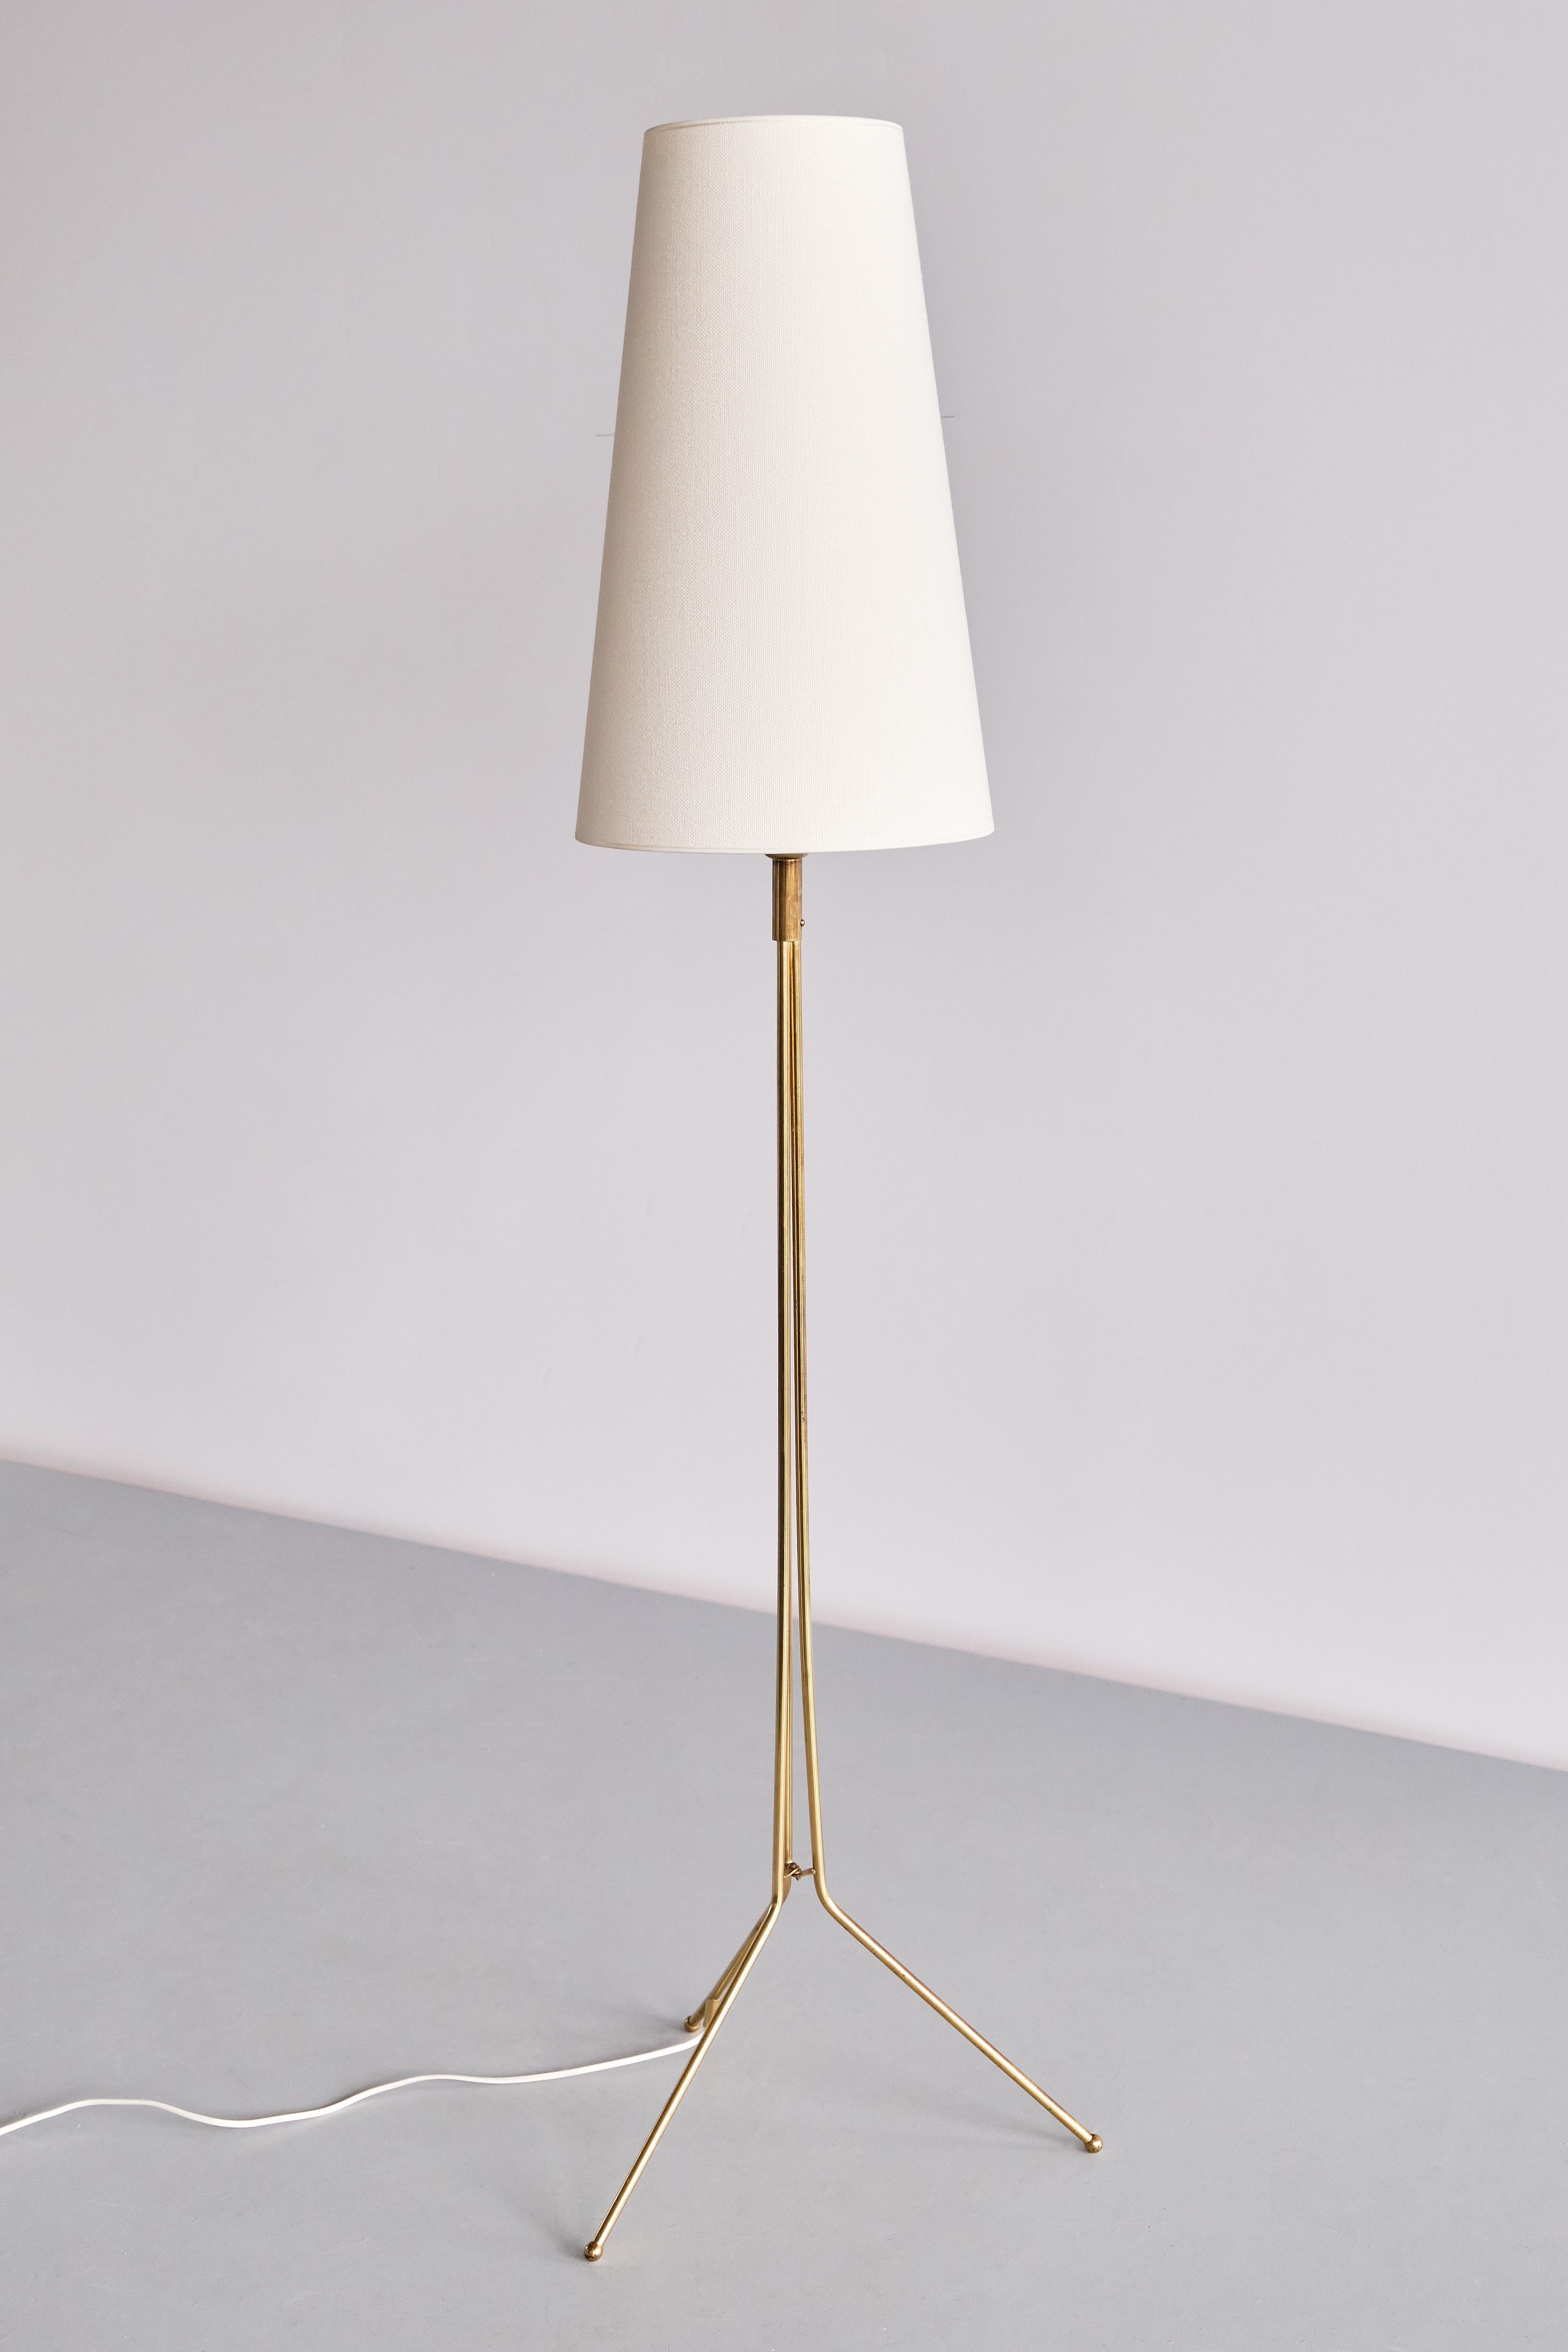 This elegant floor lamp was produced in Sweden in the 1950s. The design is marked by the tripod base, with the three brass legs continuing in three tubular stems which meet in the centre. The brass fitting with a button light switch. The cone shaped